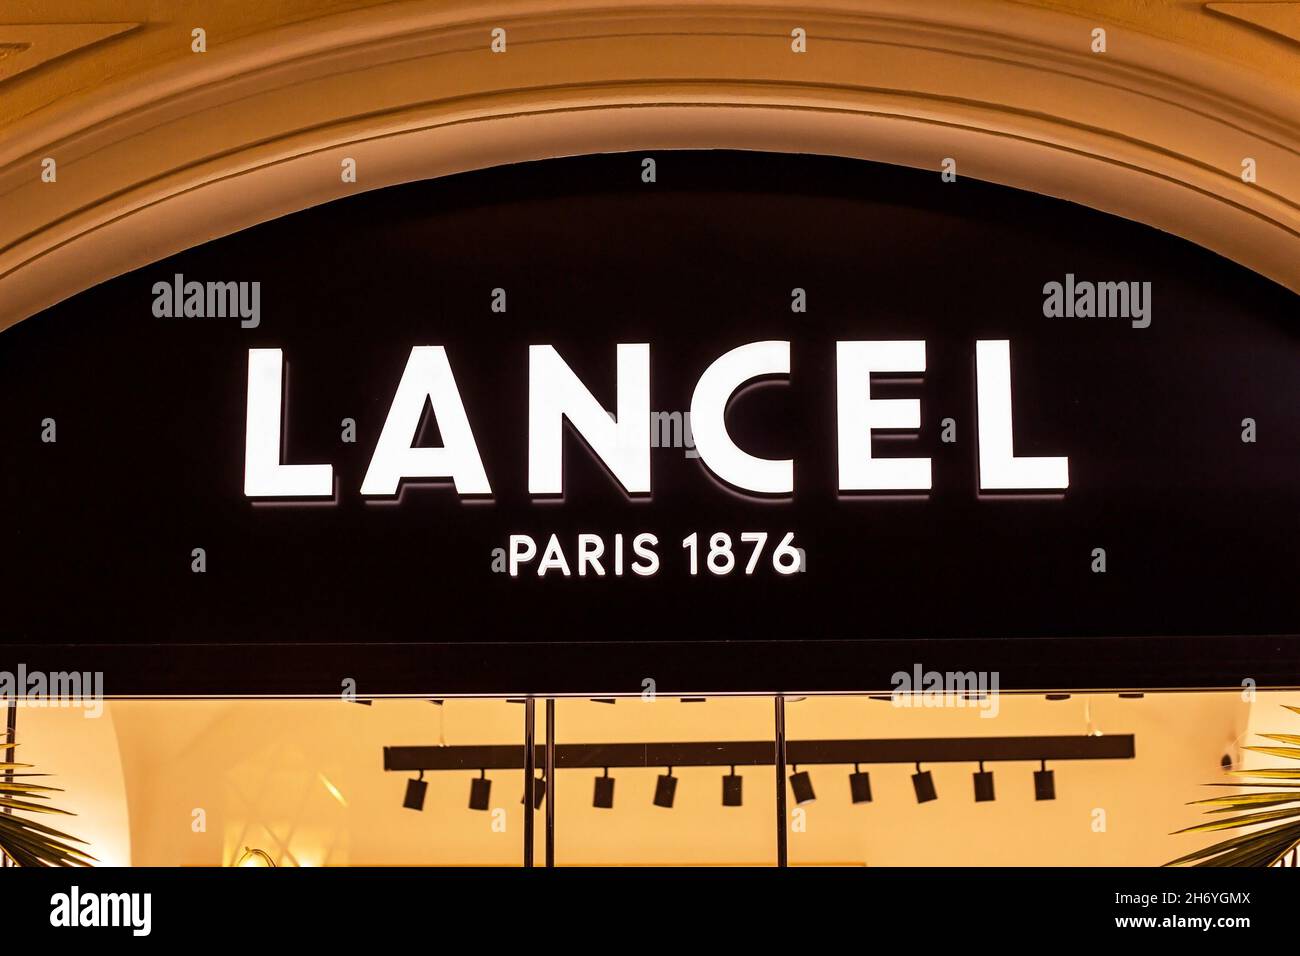 MOSCOW, RUSSIA - AUGUST 10, 2021: Lancel brand retail shop logo singboard on the storefront in the shopping mall. Stock Photo